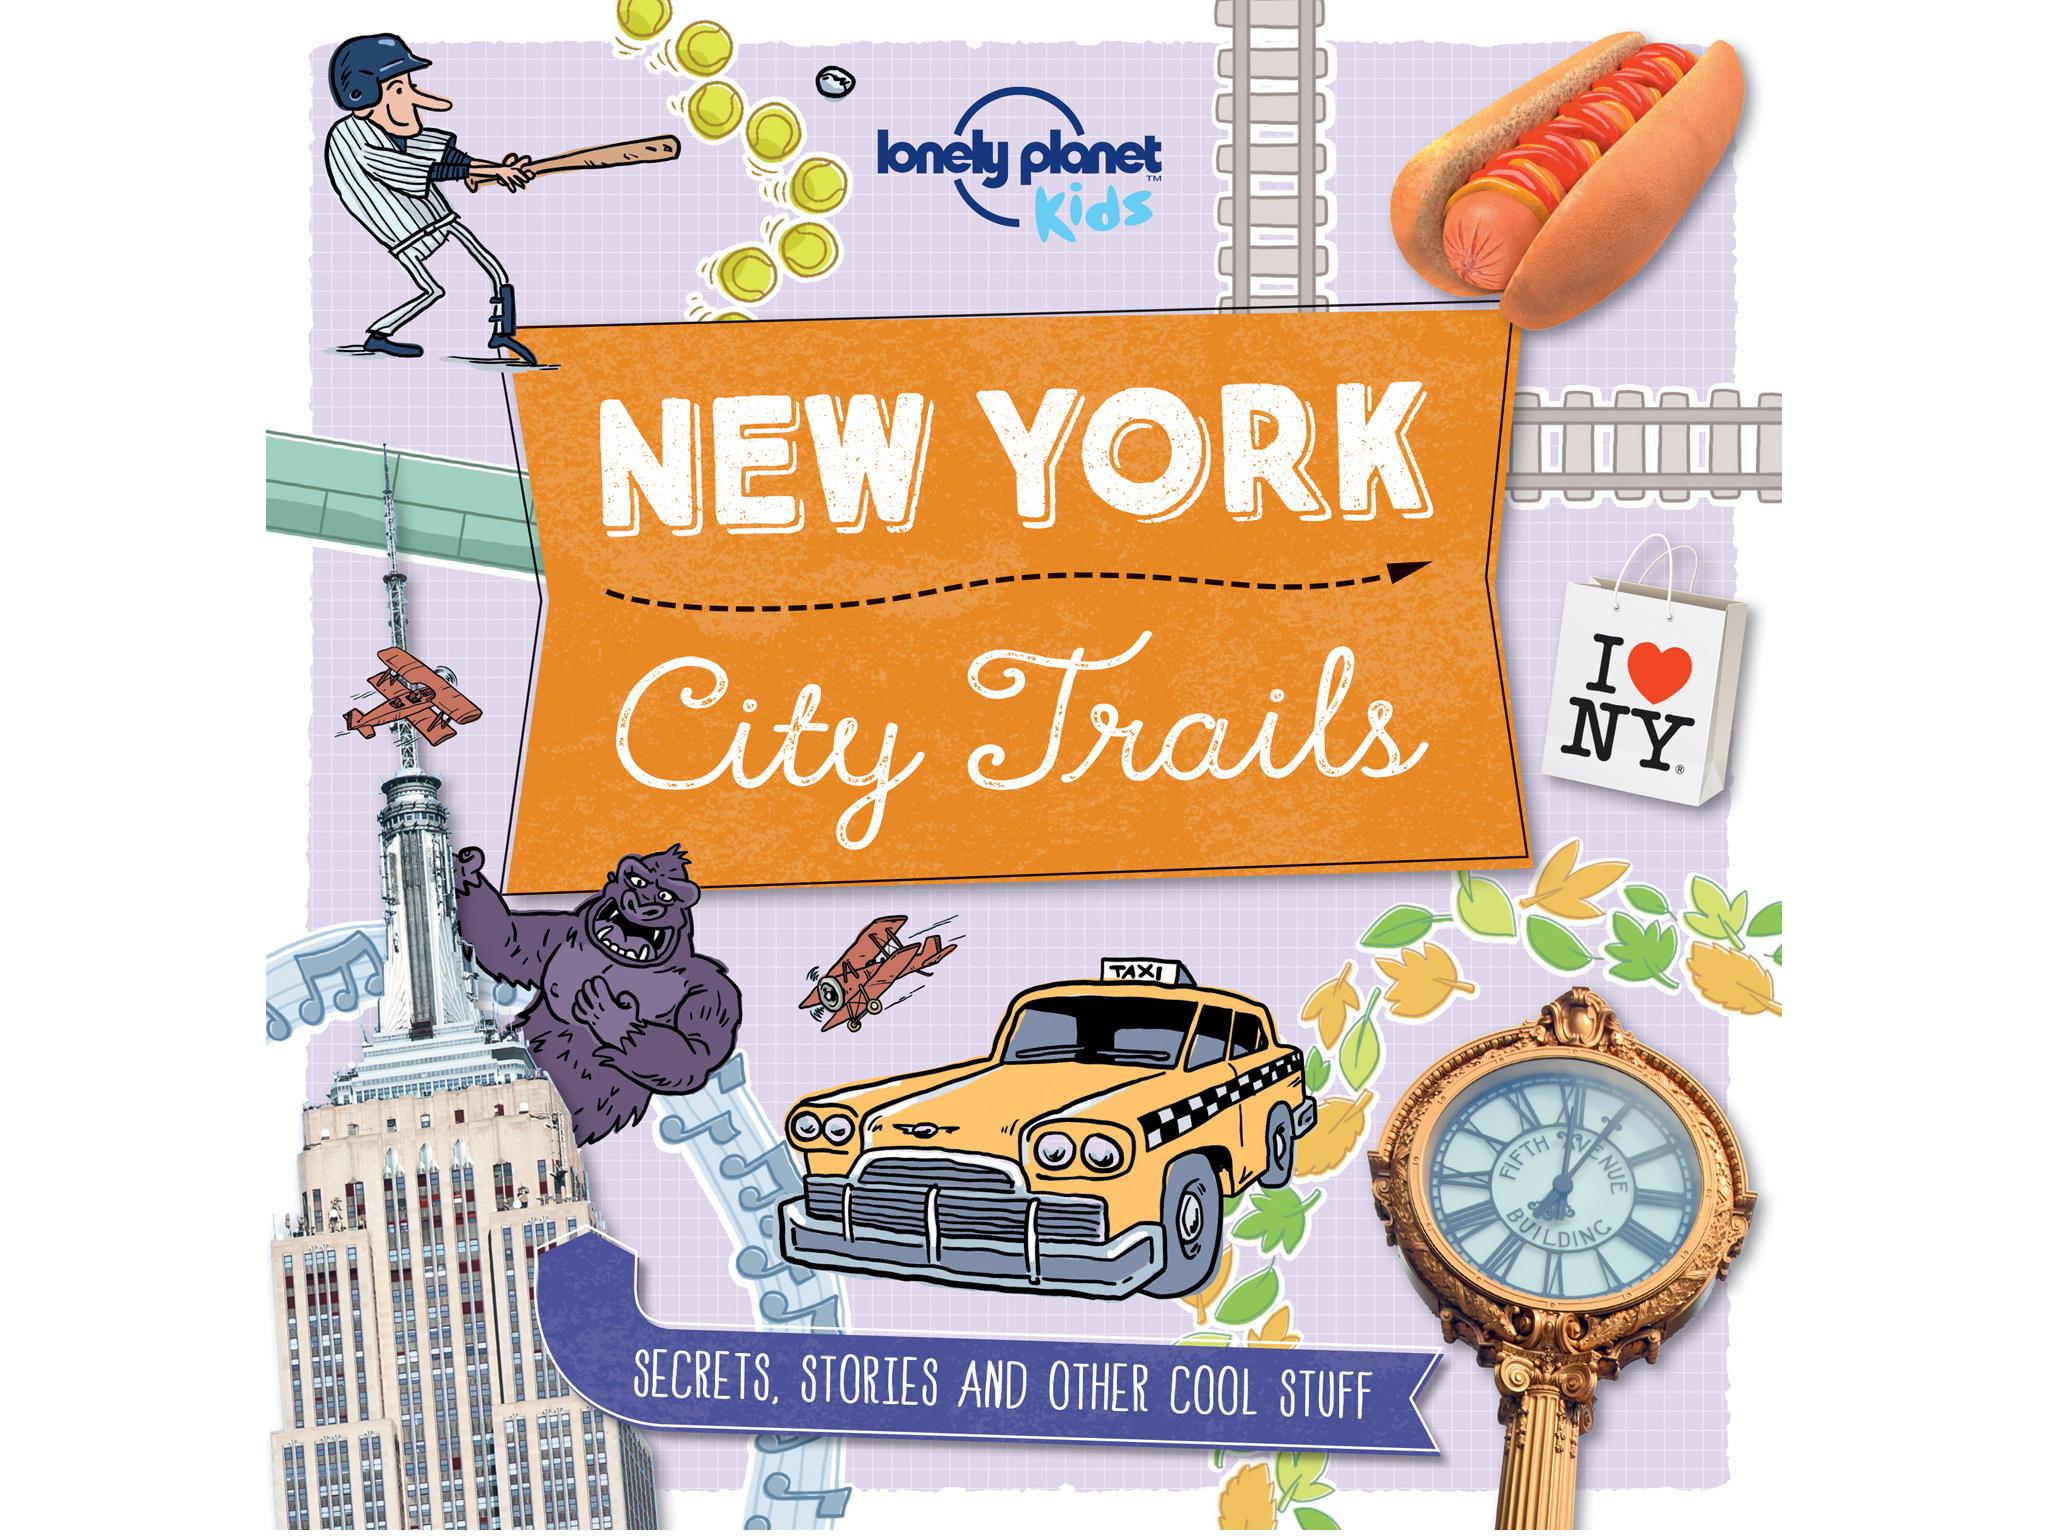 There are three books in the City Trails series